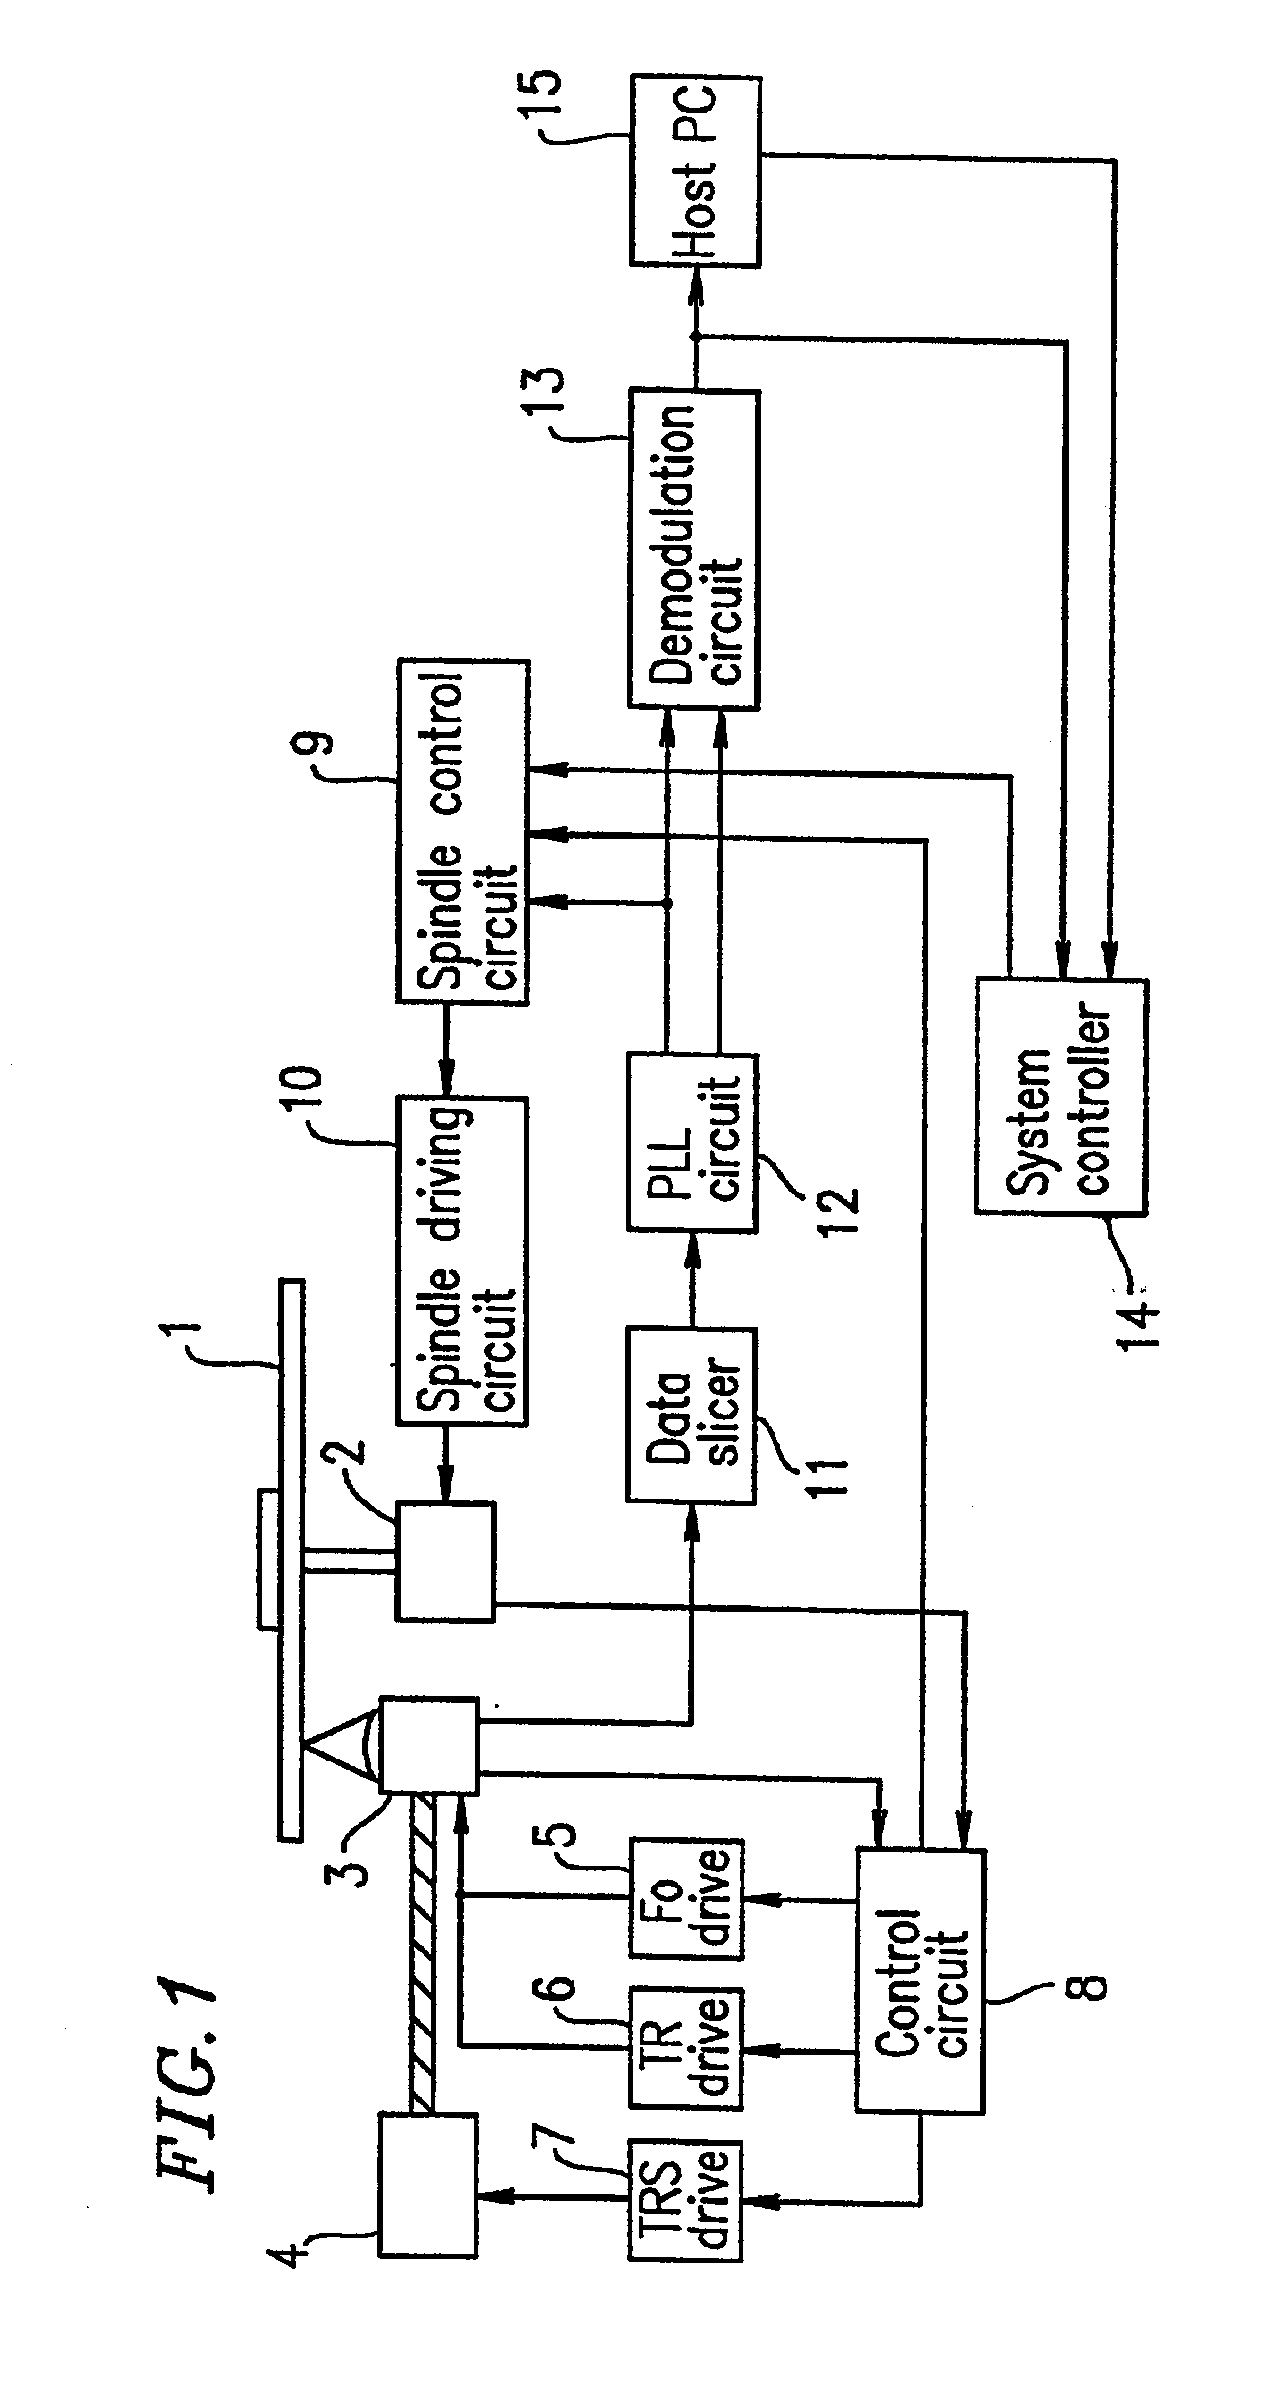 Information reproduction apparatus with selective CLV and CAV control